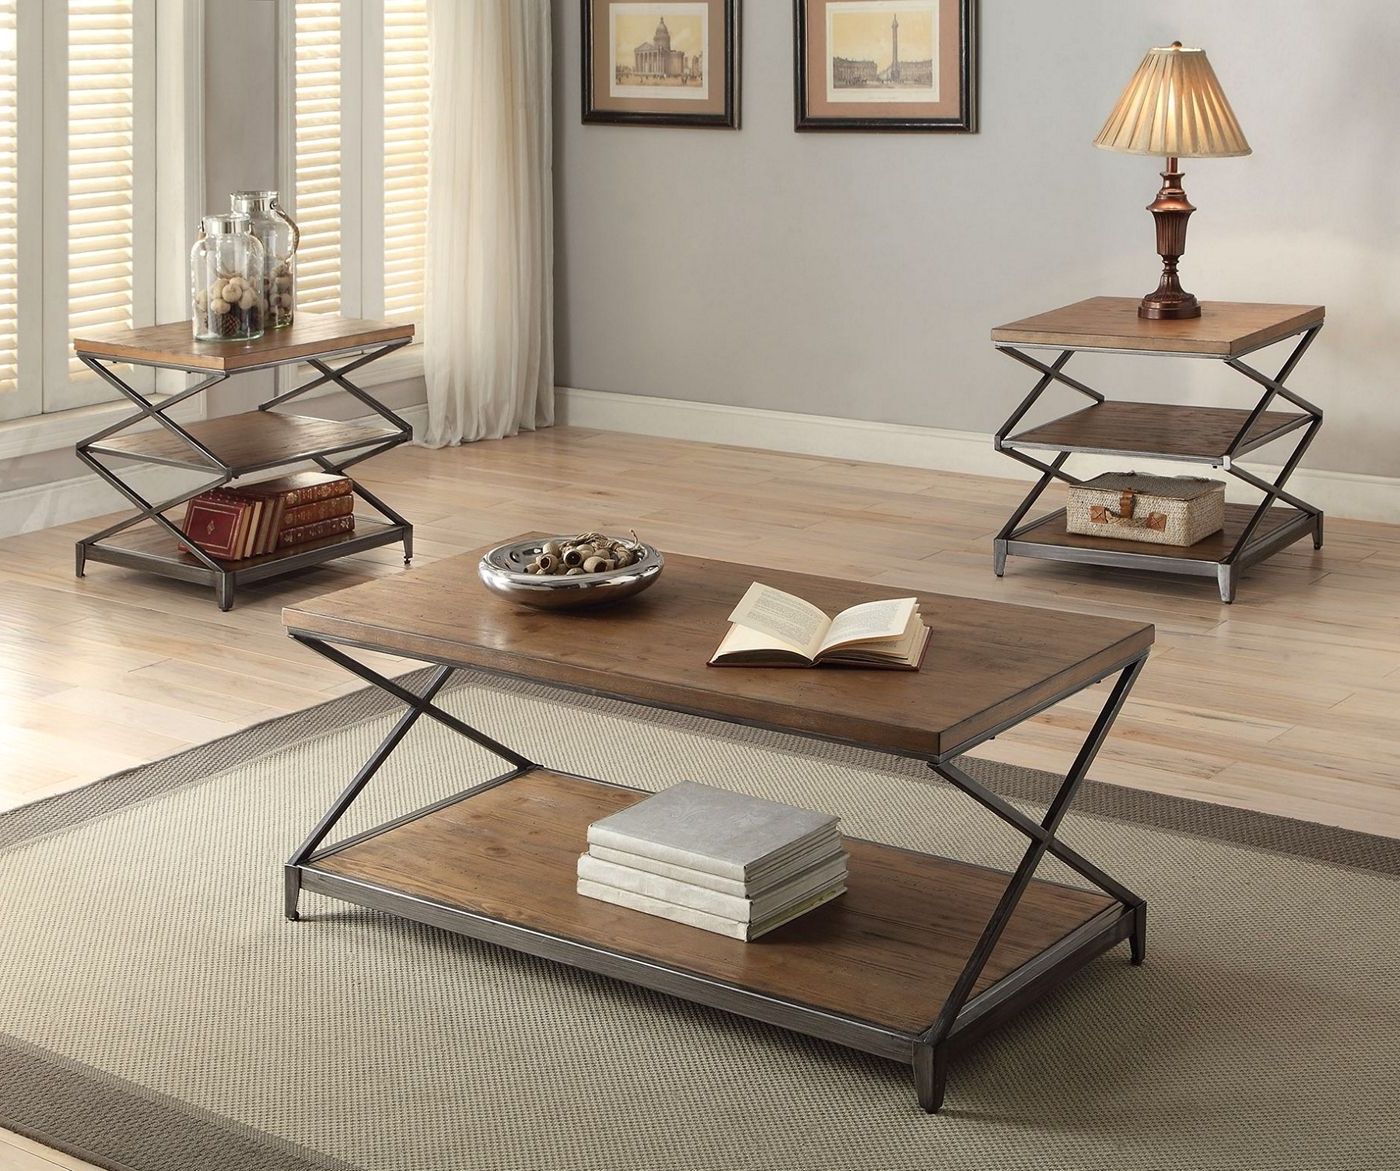 Alano Rustic Slat Wood Coffee Table In Oak & Antique Black Metal Frame In Well Liked Metal Coffee Tables (View 4 of 10)